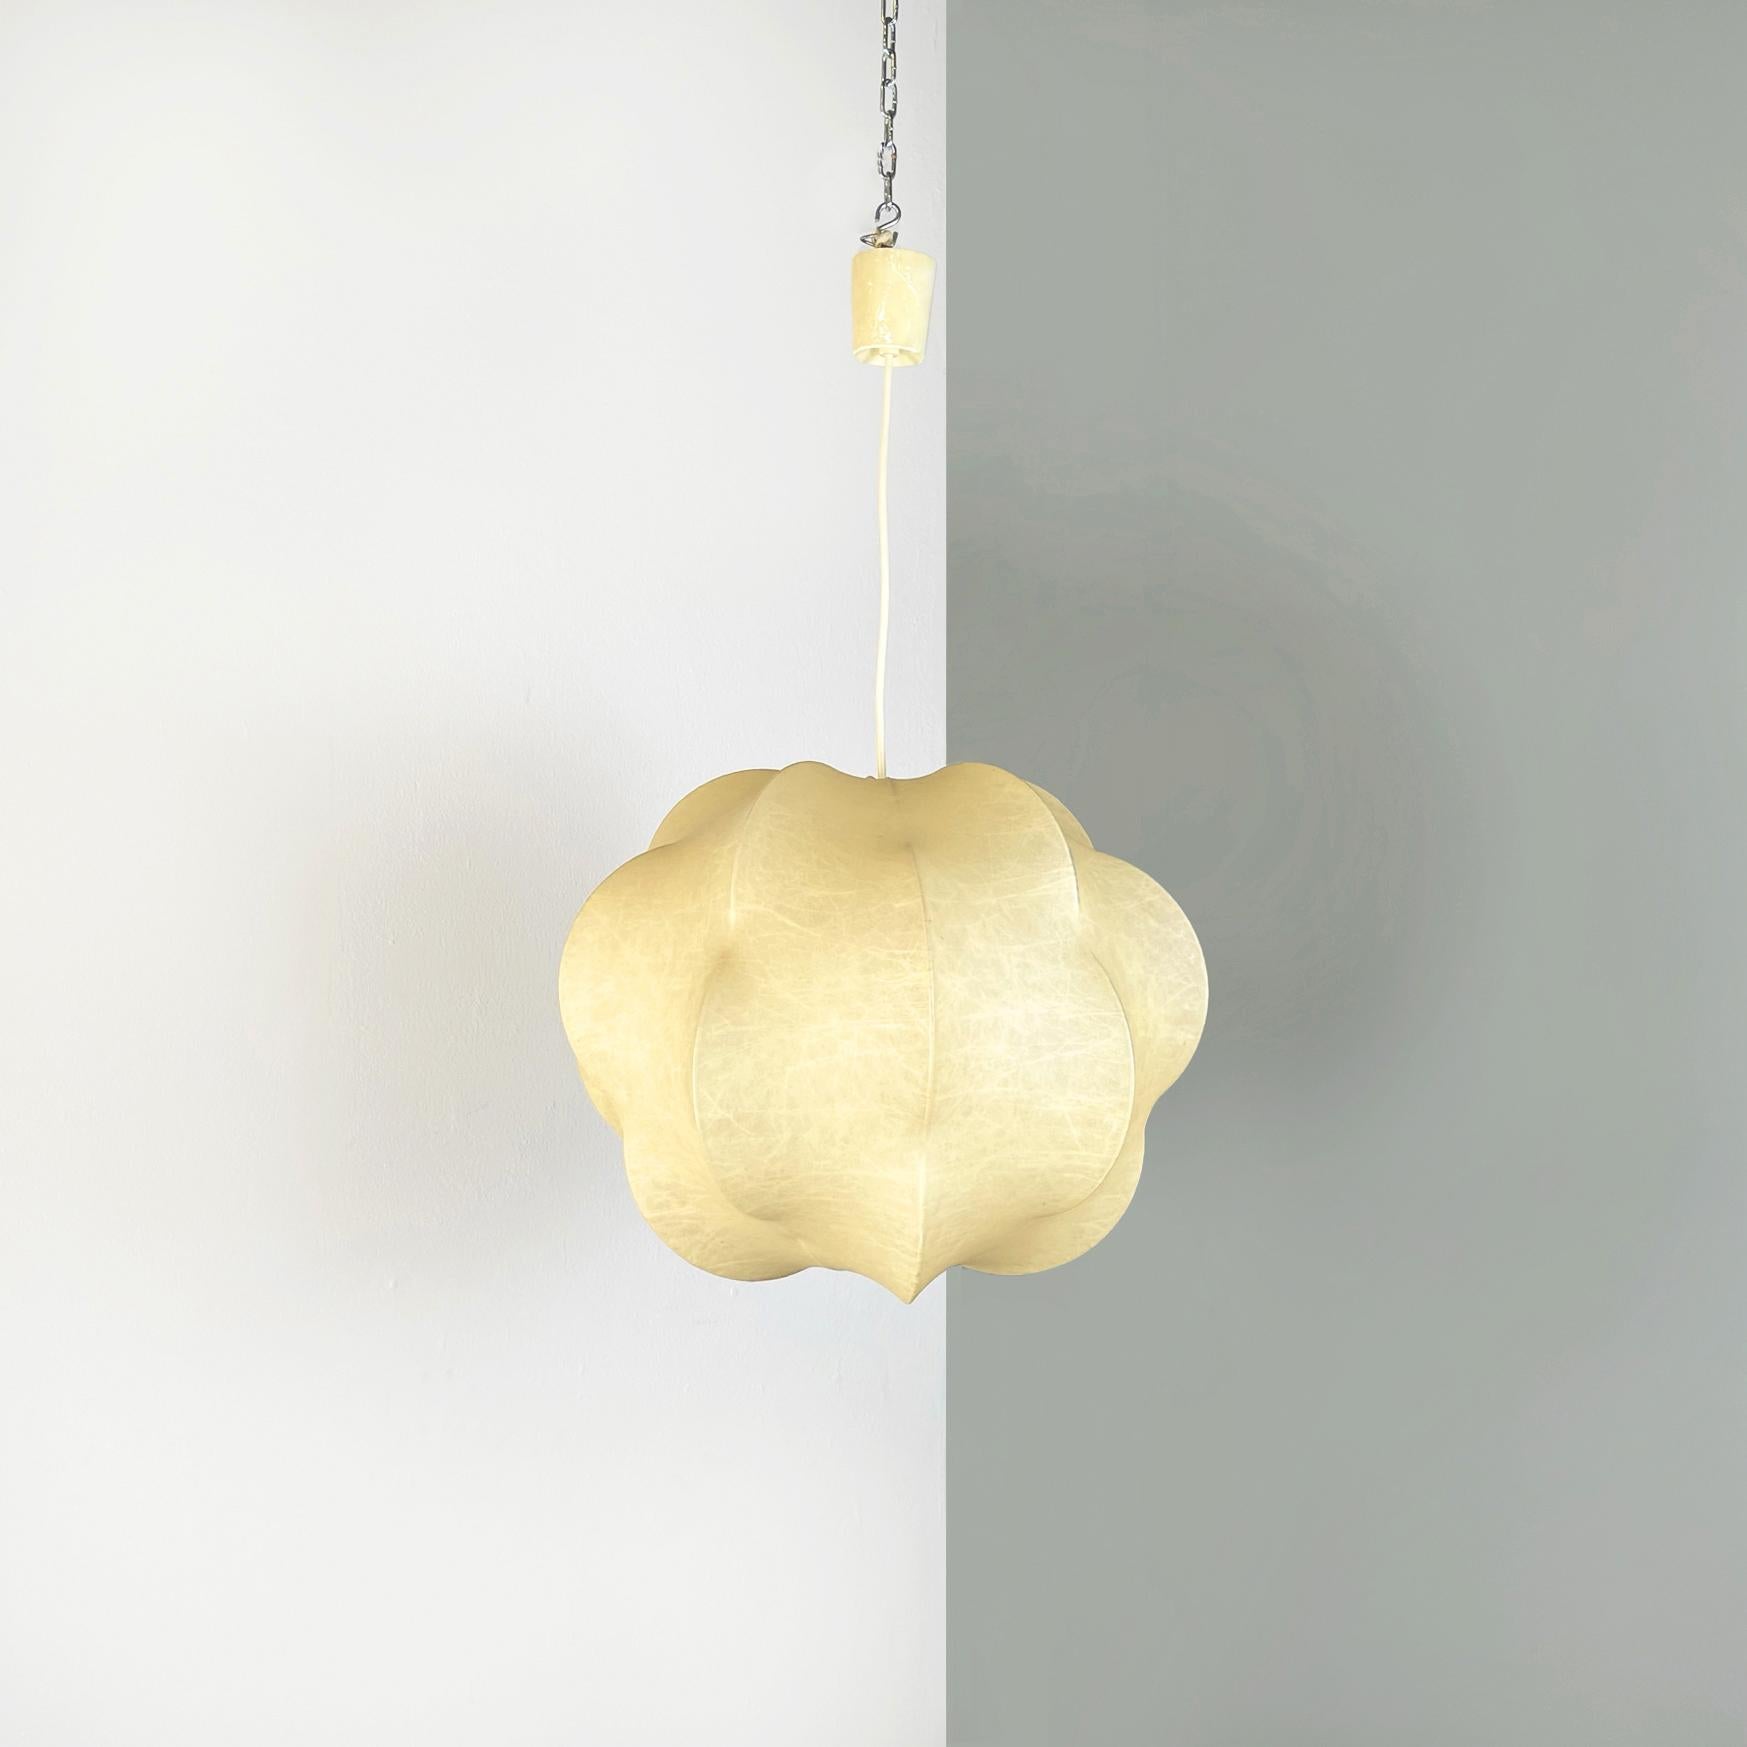 Italian midcentury Cocoon chandelier Nuvola by Tobia Scarpa for Flos, 1970s
Chandelier mod. Nuvola (Cloud) in cocoon. The internal structure, which allows the cocoon to remain taut, is in metal rod. The chandelier takes the name of Nuvola both for